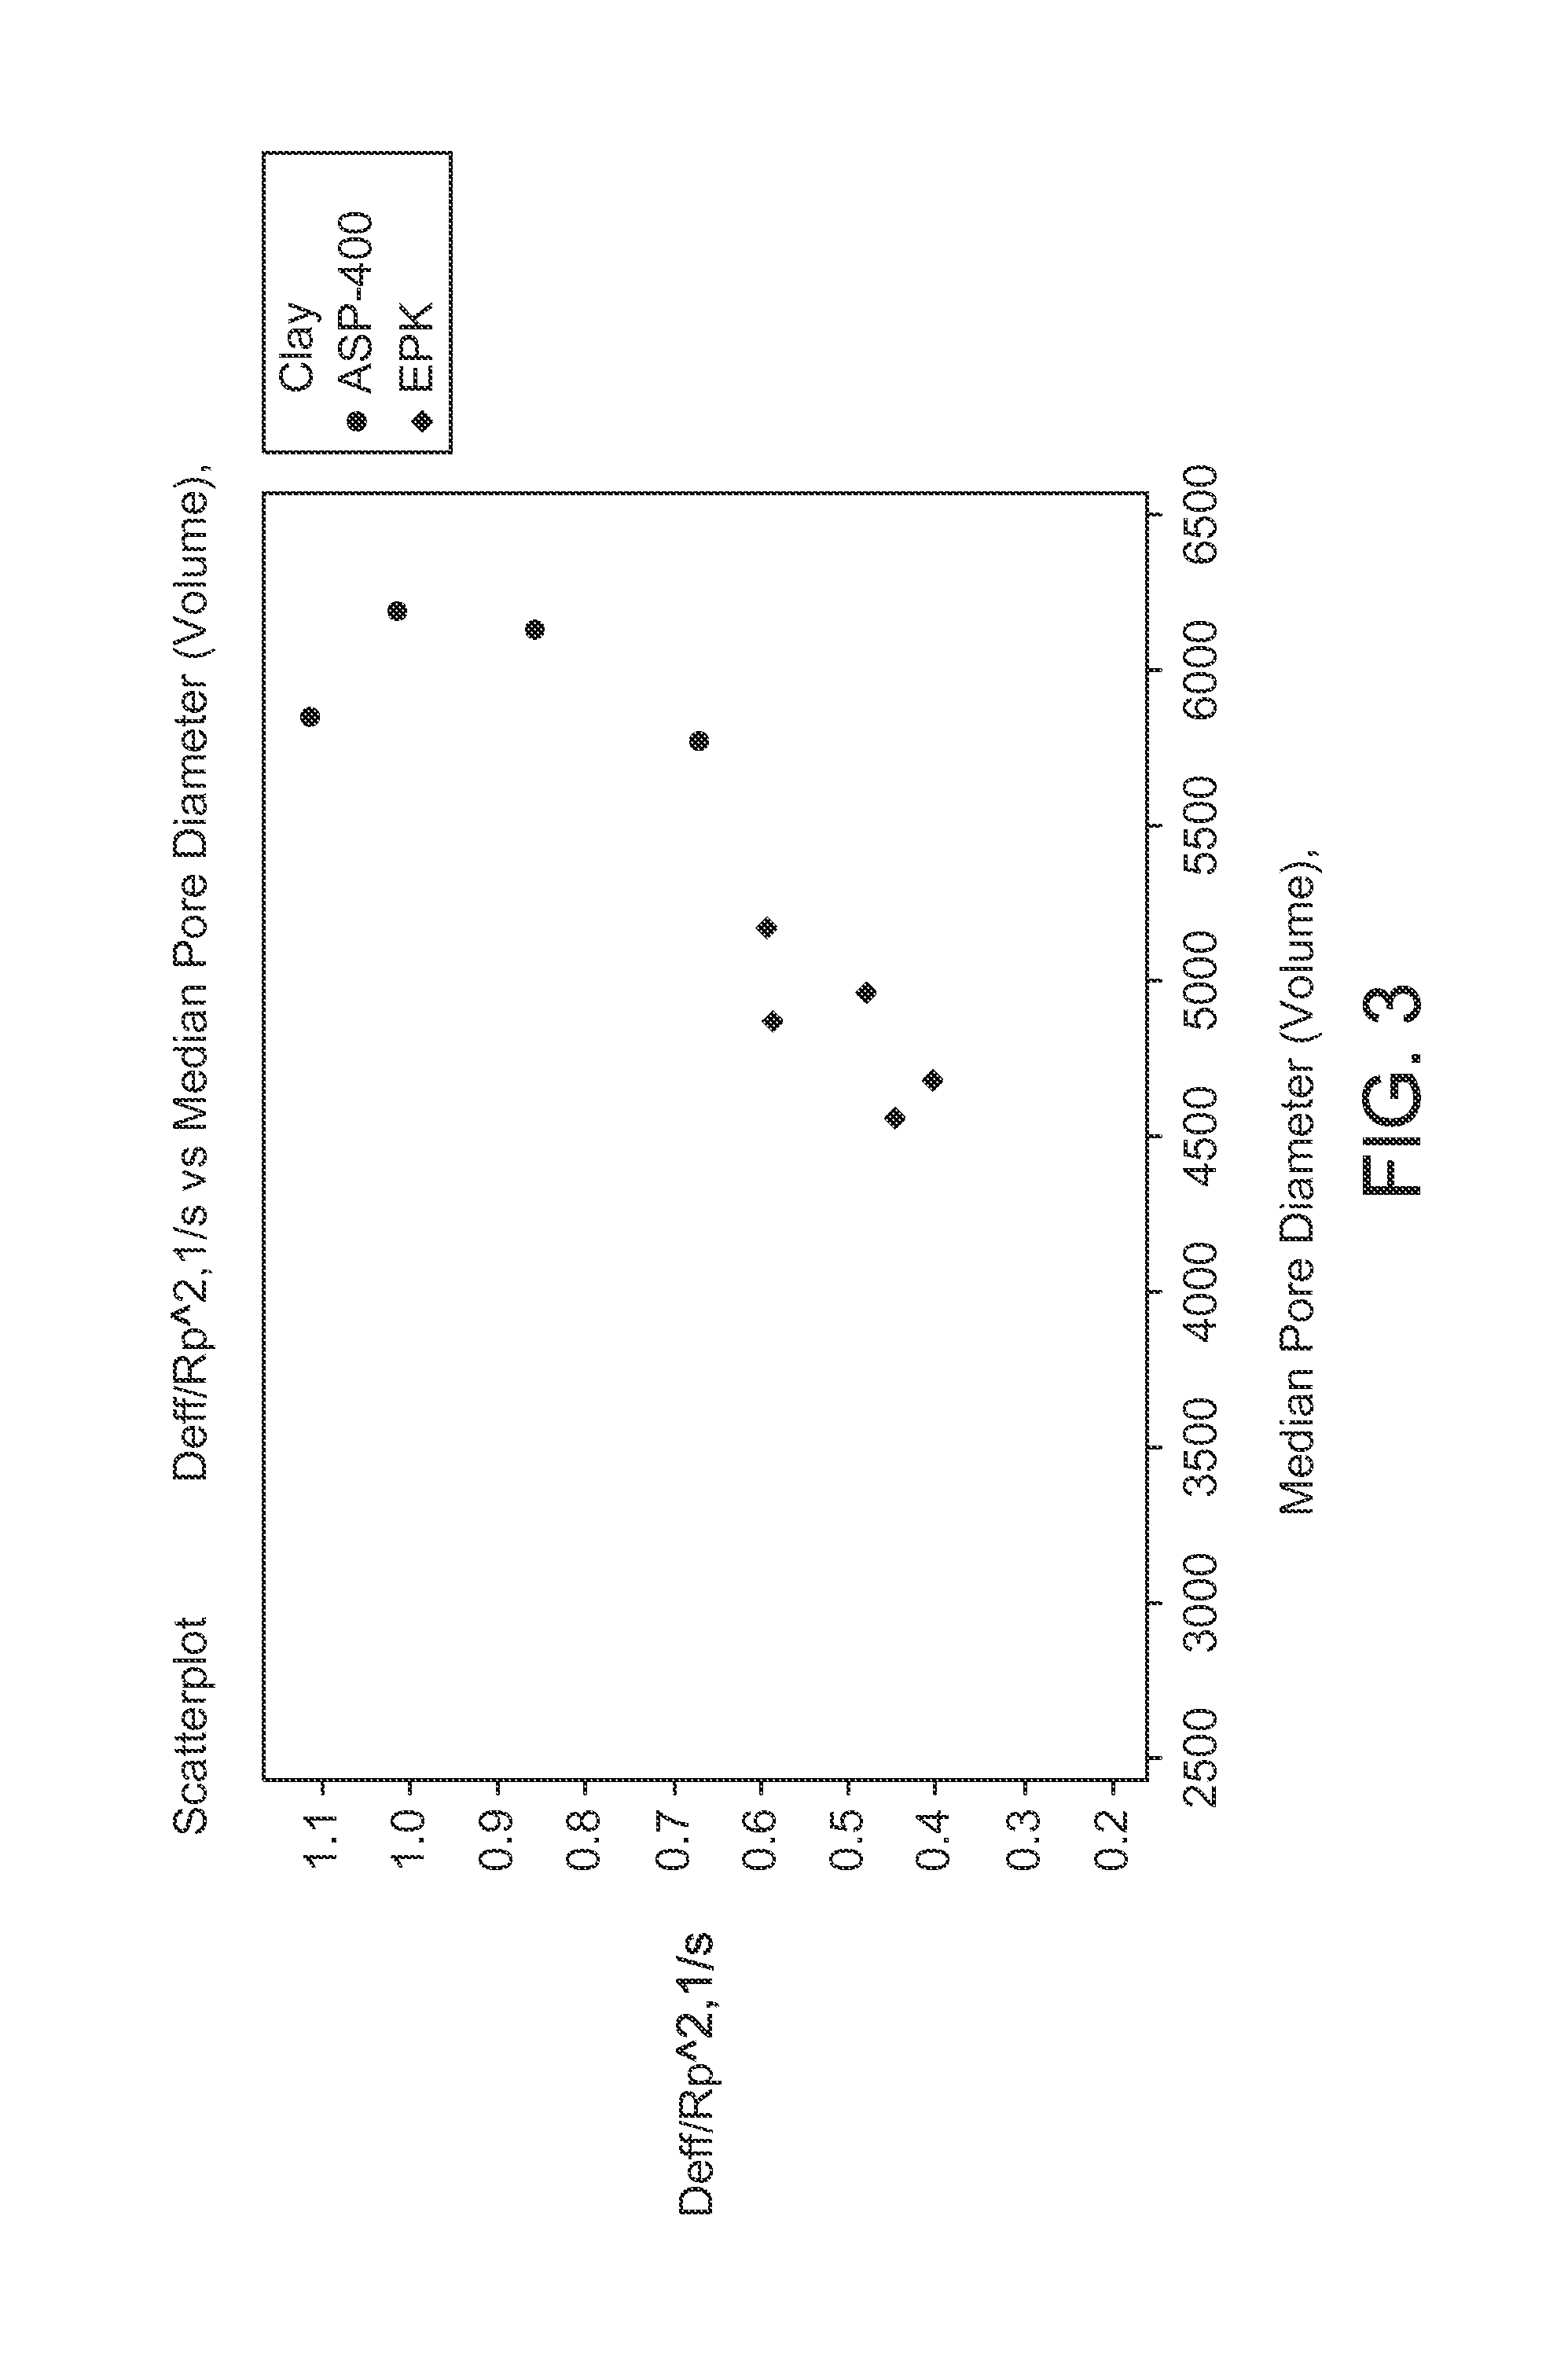 Zeolitic adsorbents for use in adsorptive separation processes and methods for manufacturing the same